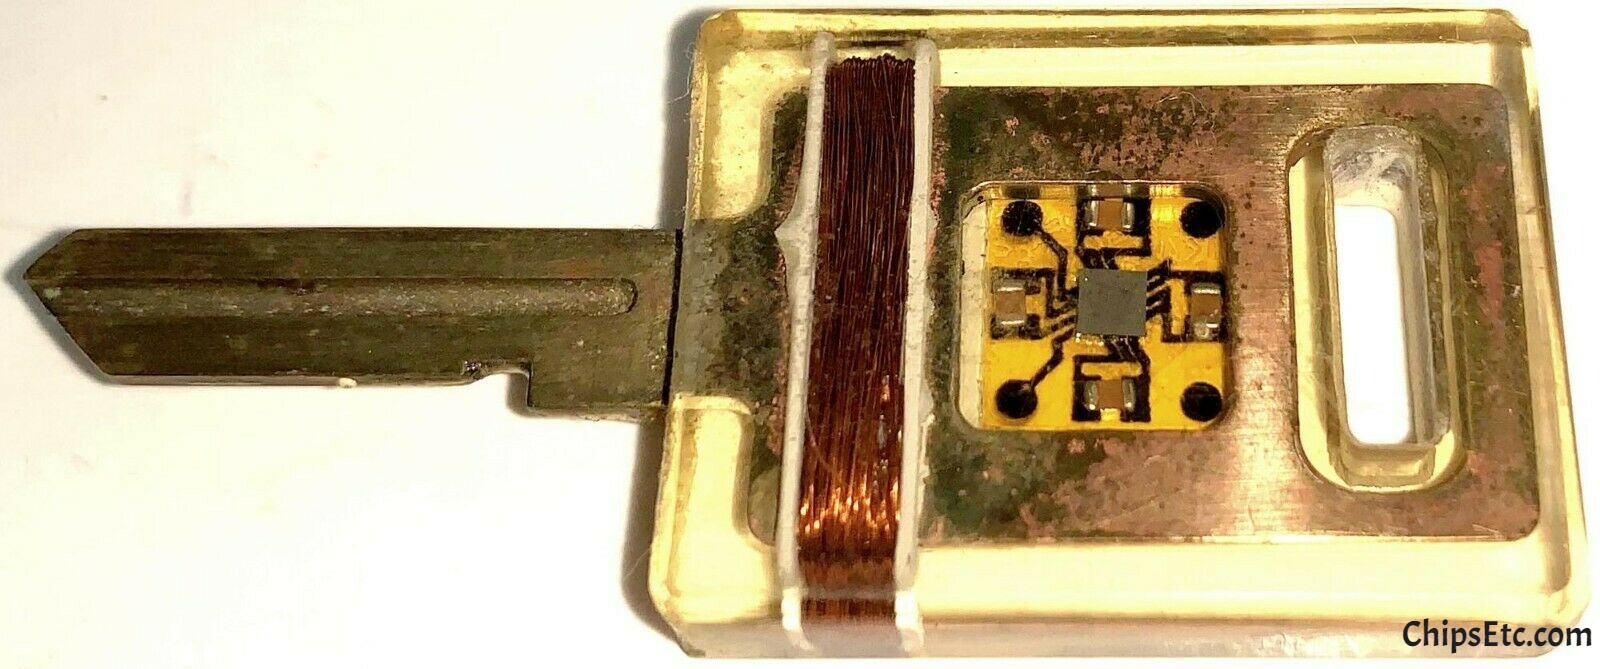 delco hughes electronics early prototype car key transponder chip